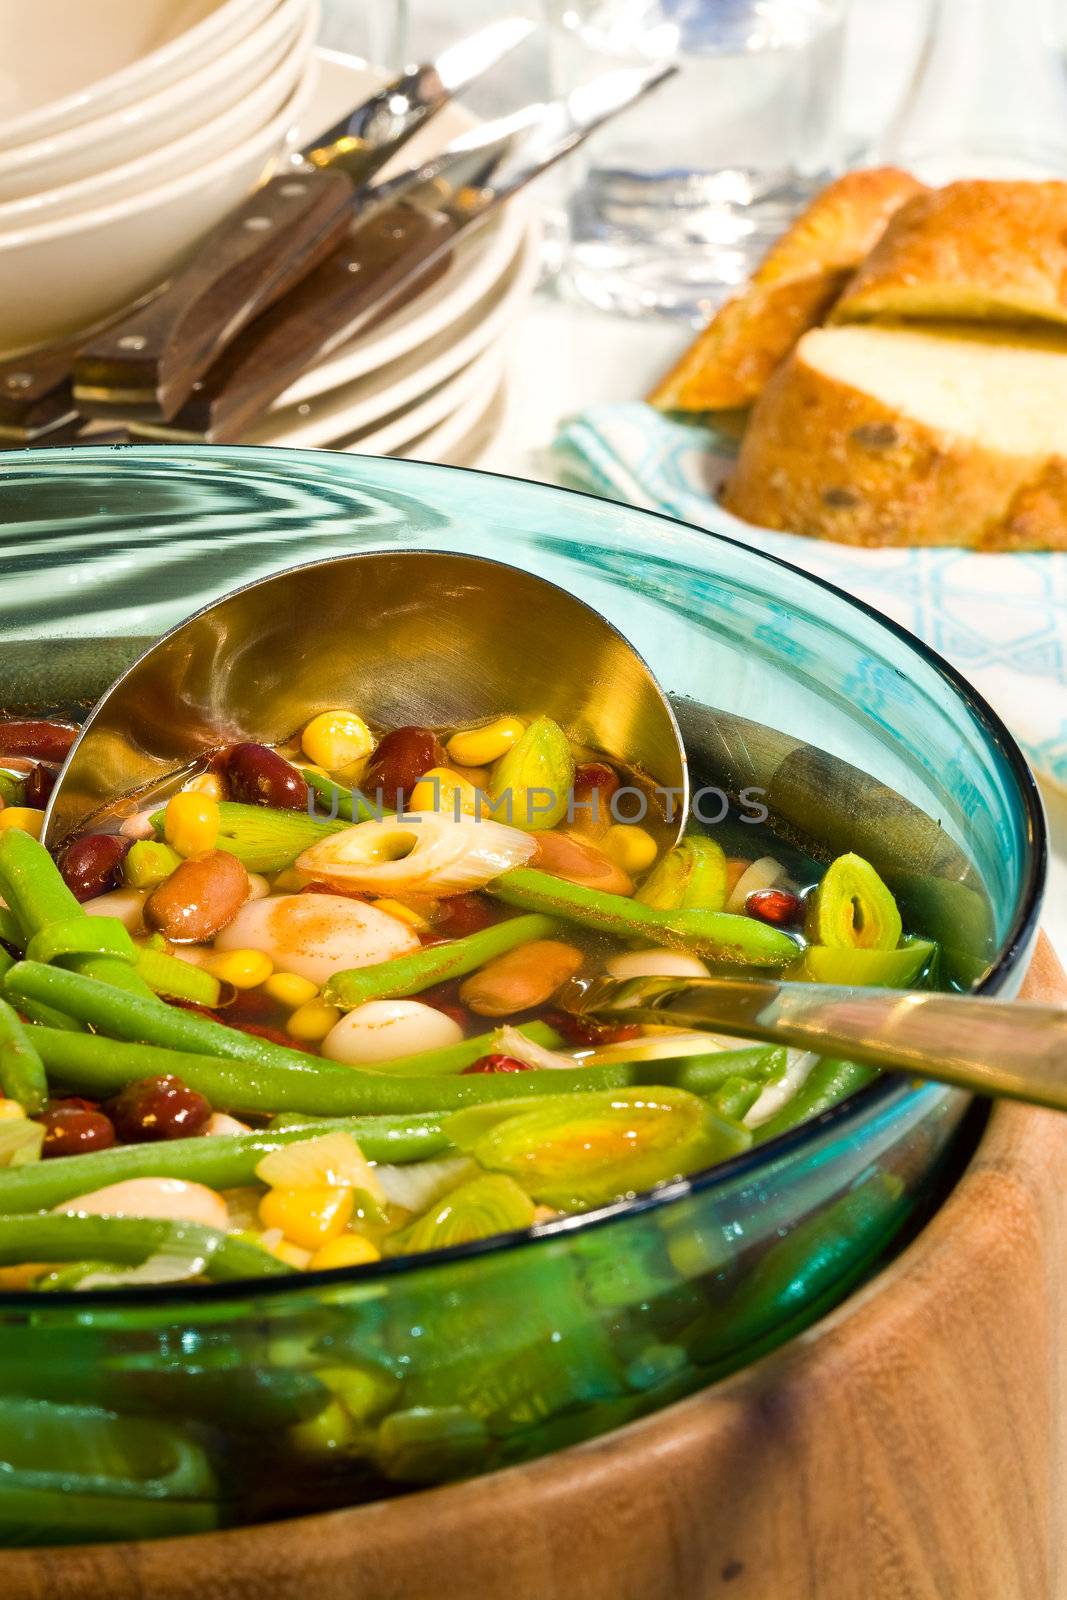 Vegetable soup by Gravicapa